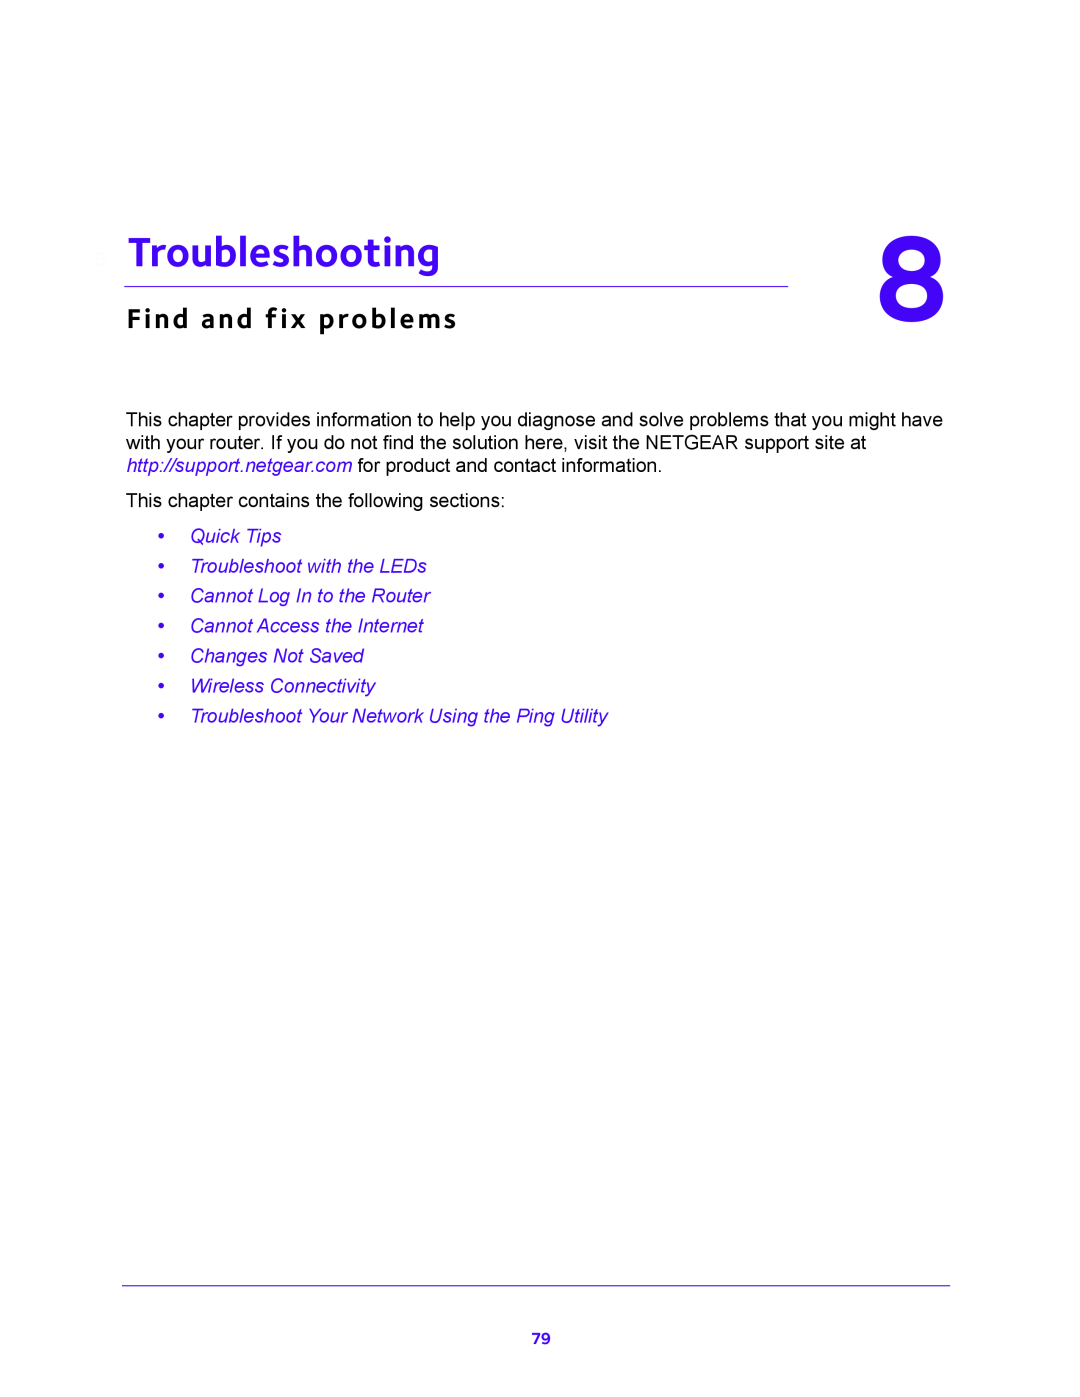 NETGEAR JNR1010V2 user manual Troubleshooting, Find and fix problems, Troubleshoot Your Network Using the Ping Utility 